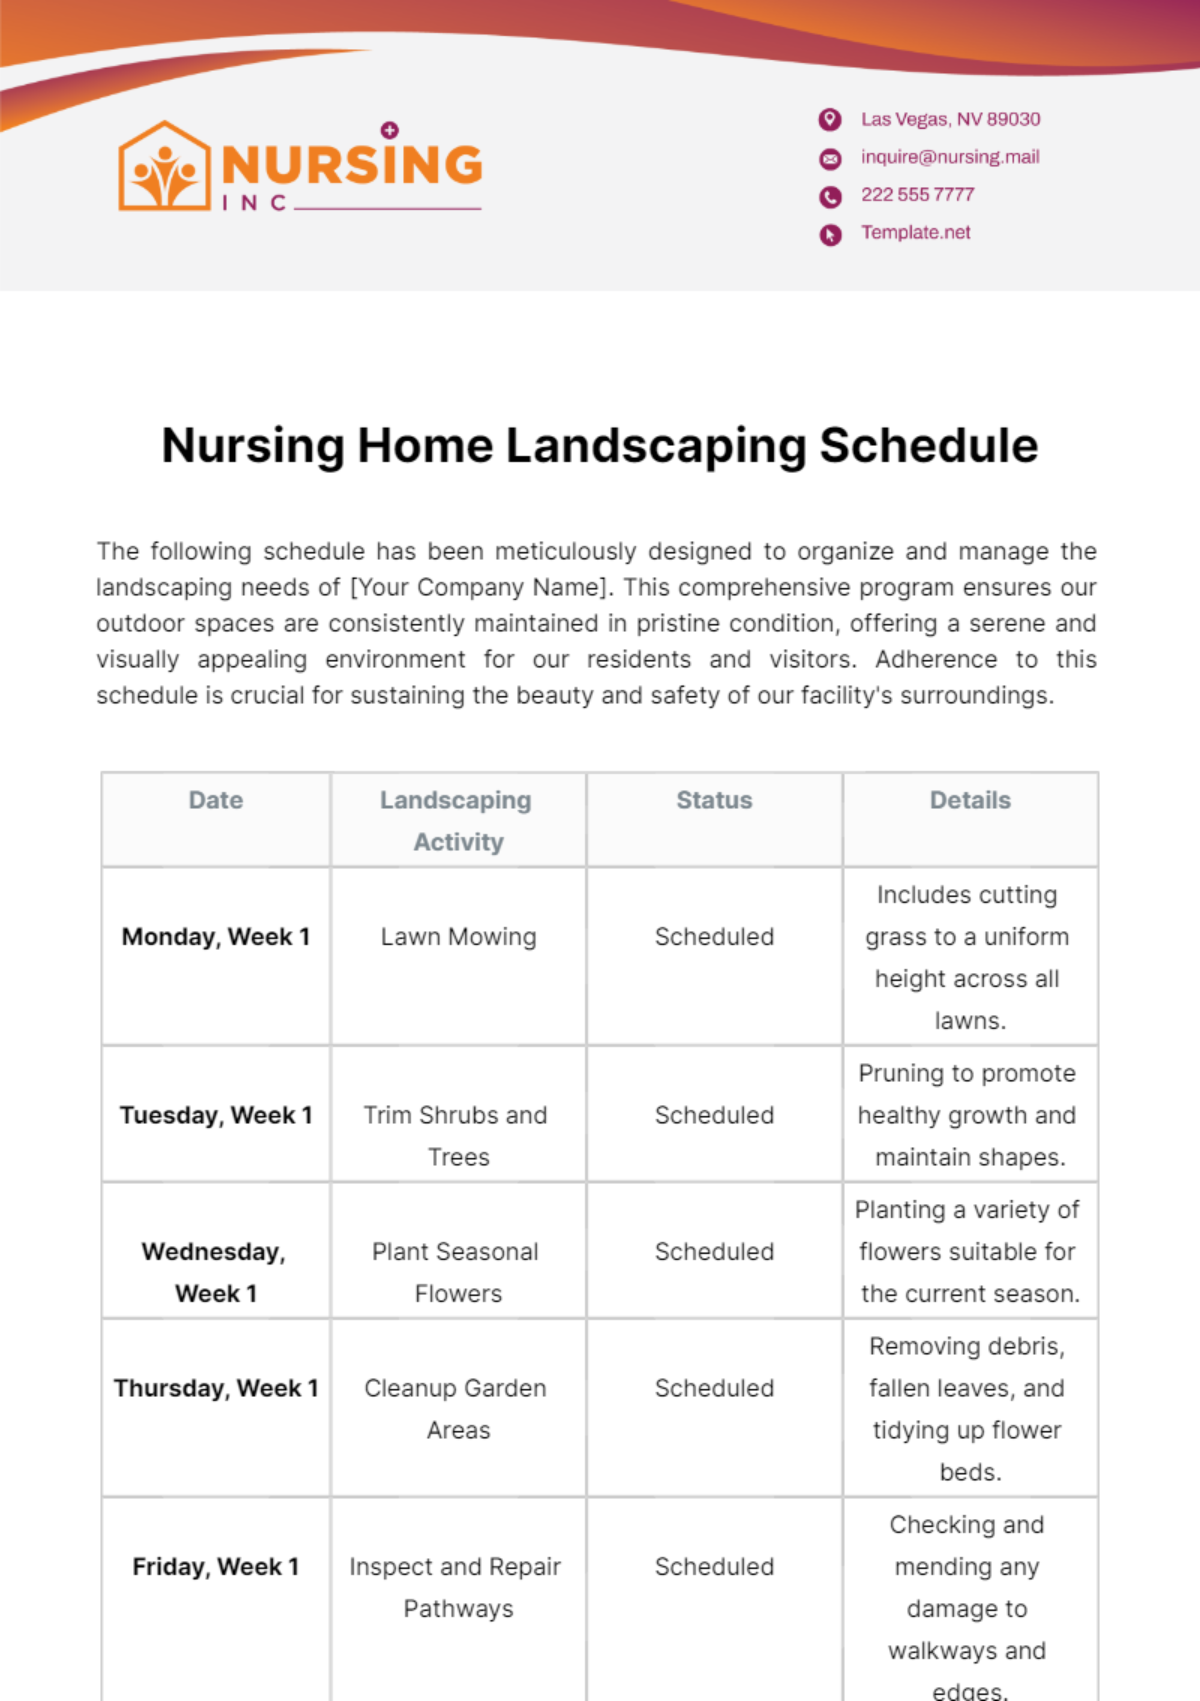 Nursing Home Landscaping Schedule Template